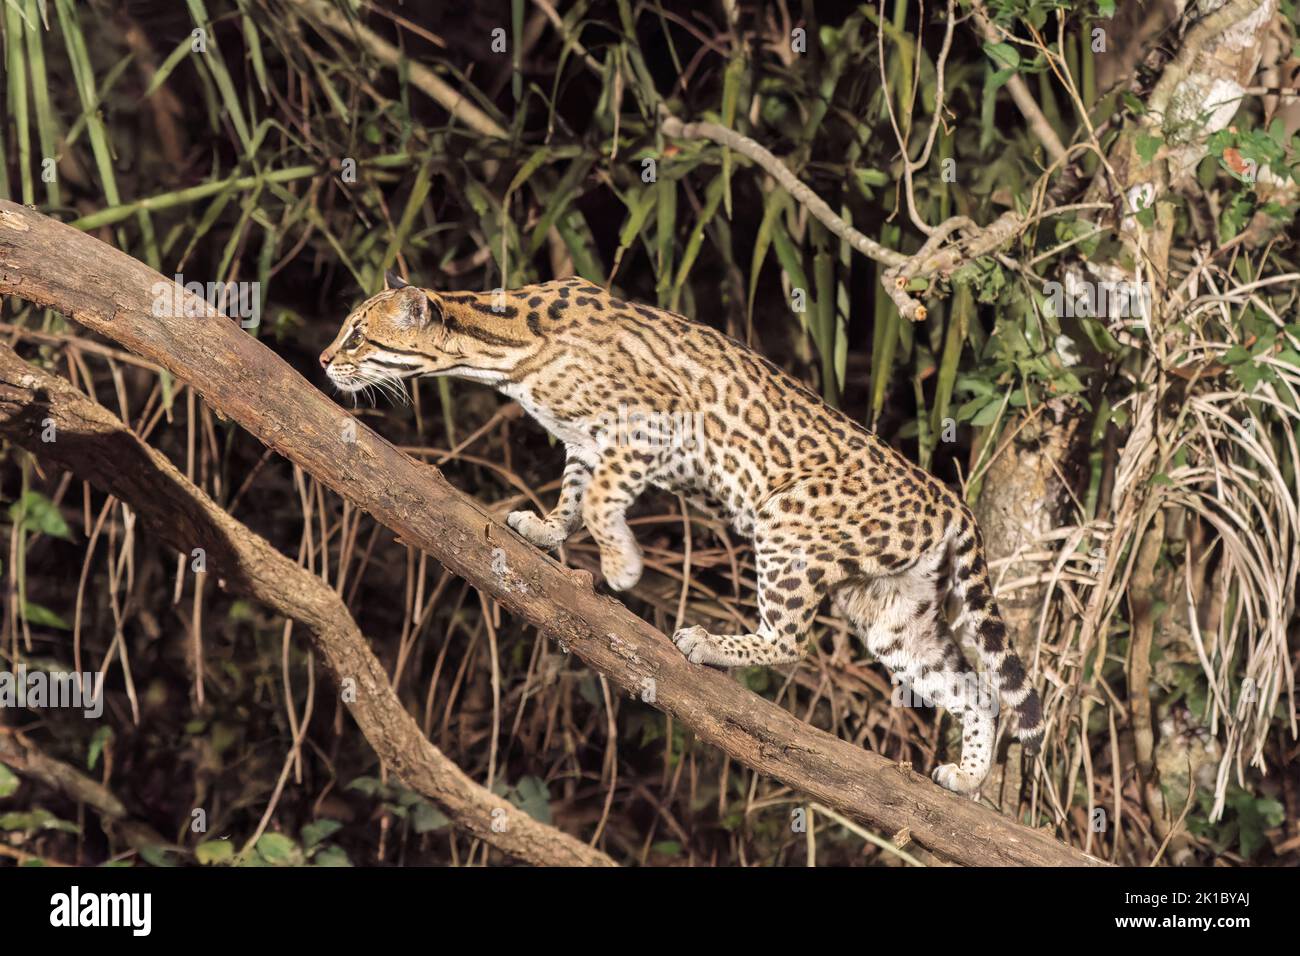 ocelot, Leopardus pardalis, single adult hunting at night in the Pantanal, Brazil Stock Photo